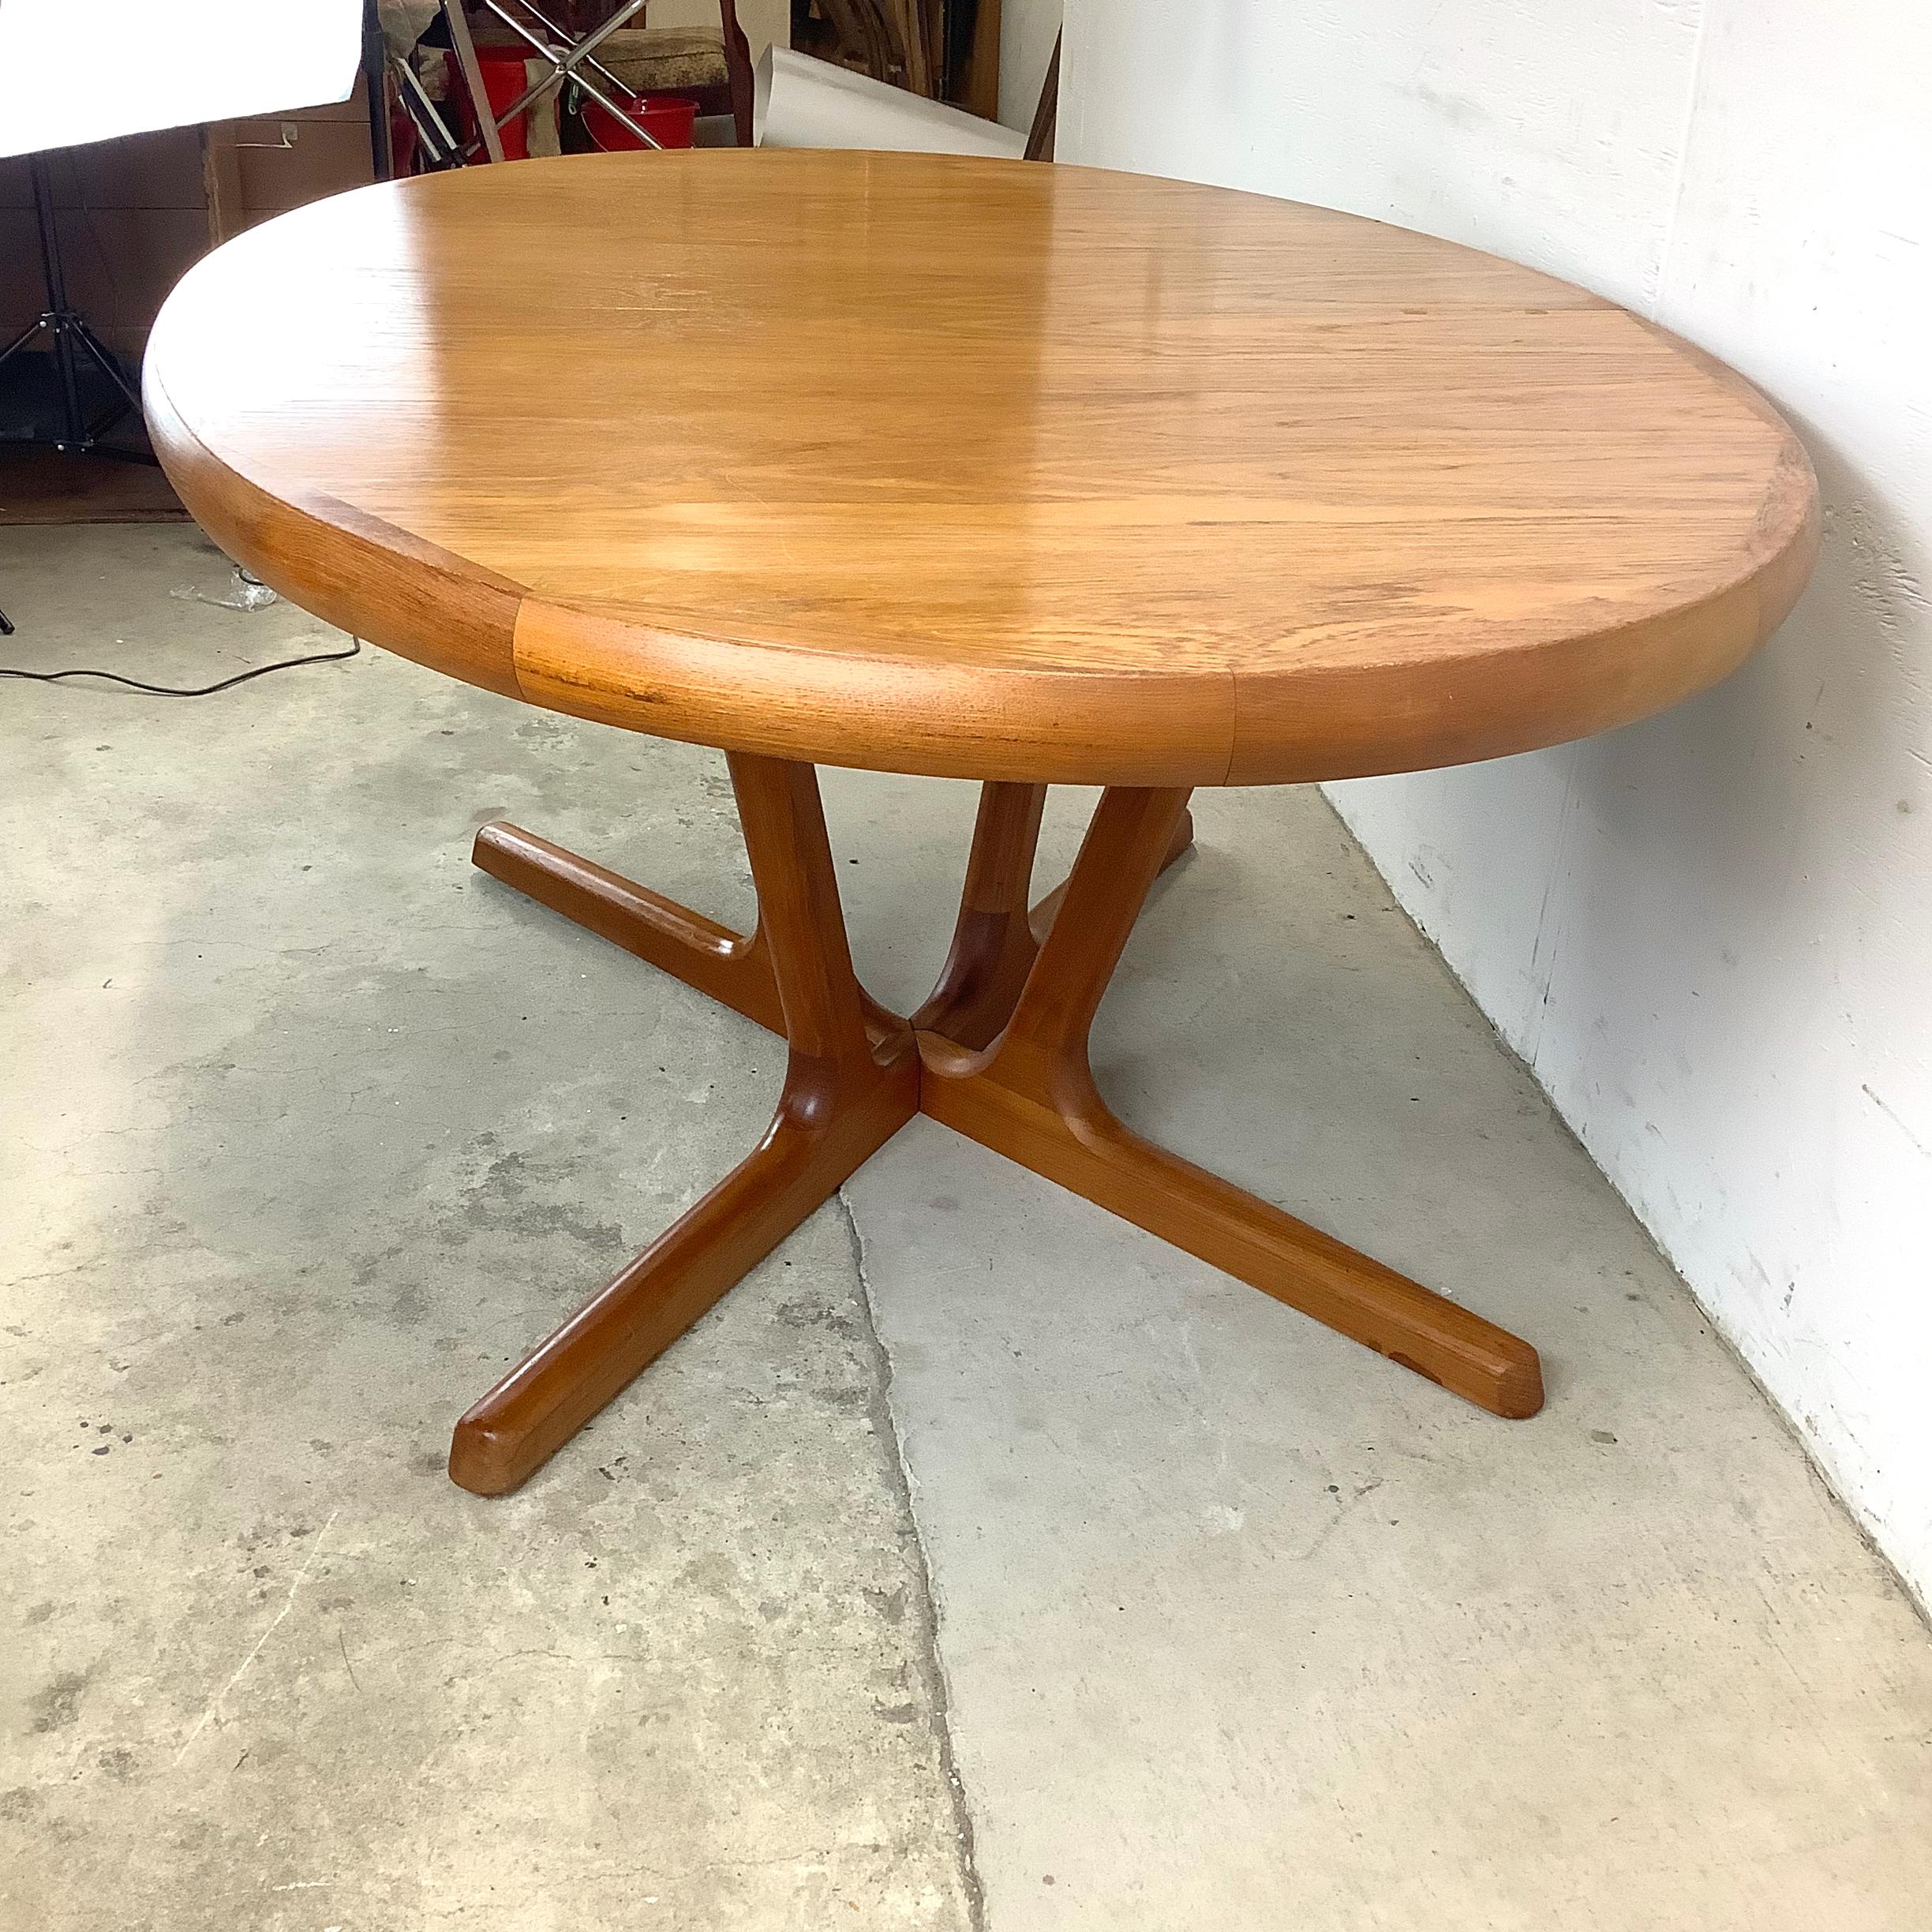 20th Century Scandinavian Modern Teak Oval Dining Table With Leaves